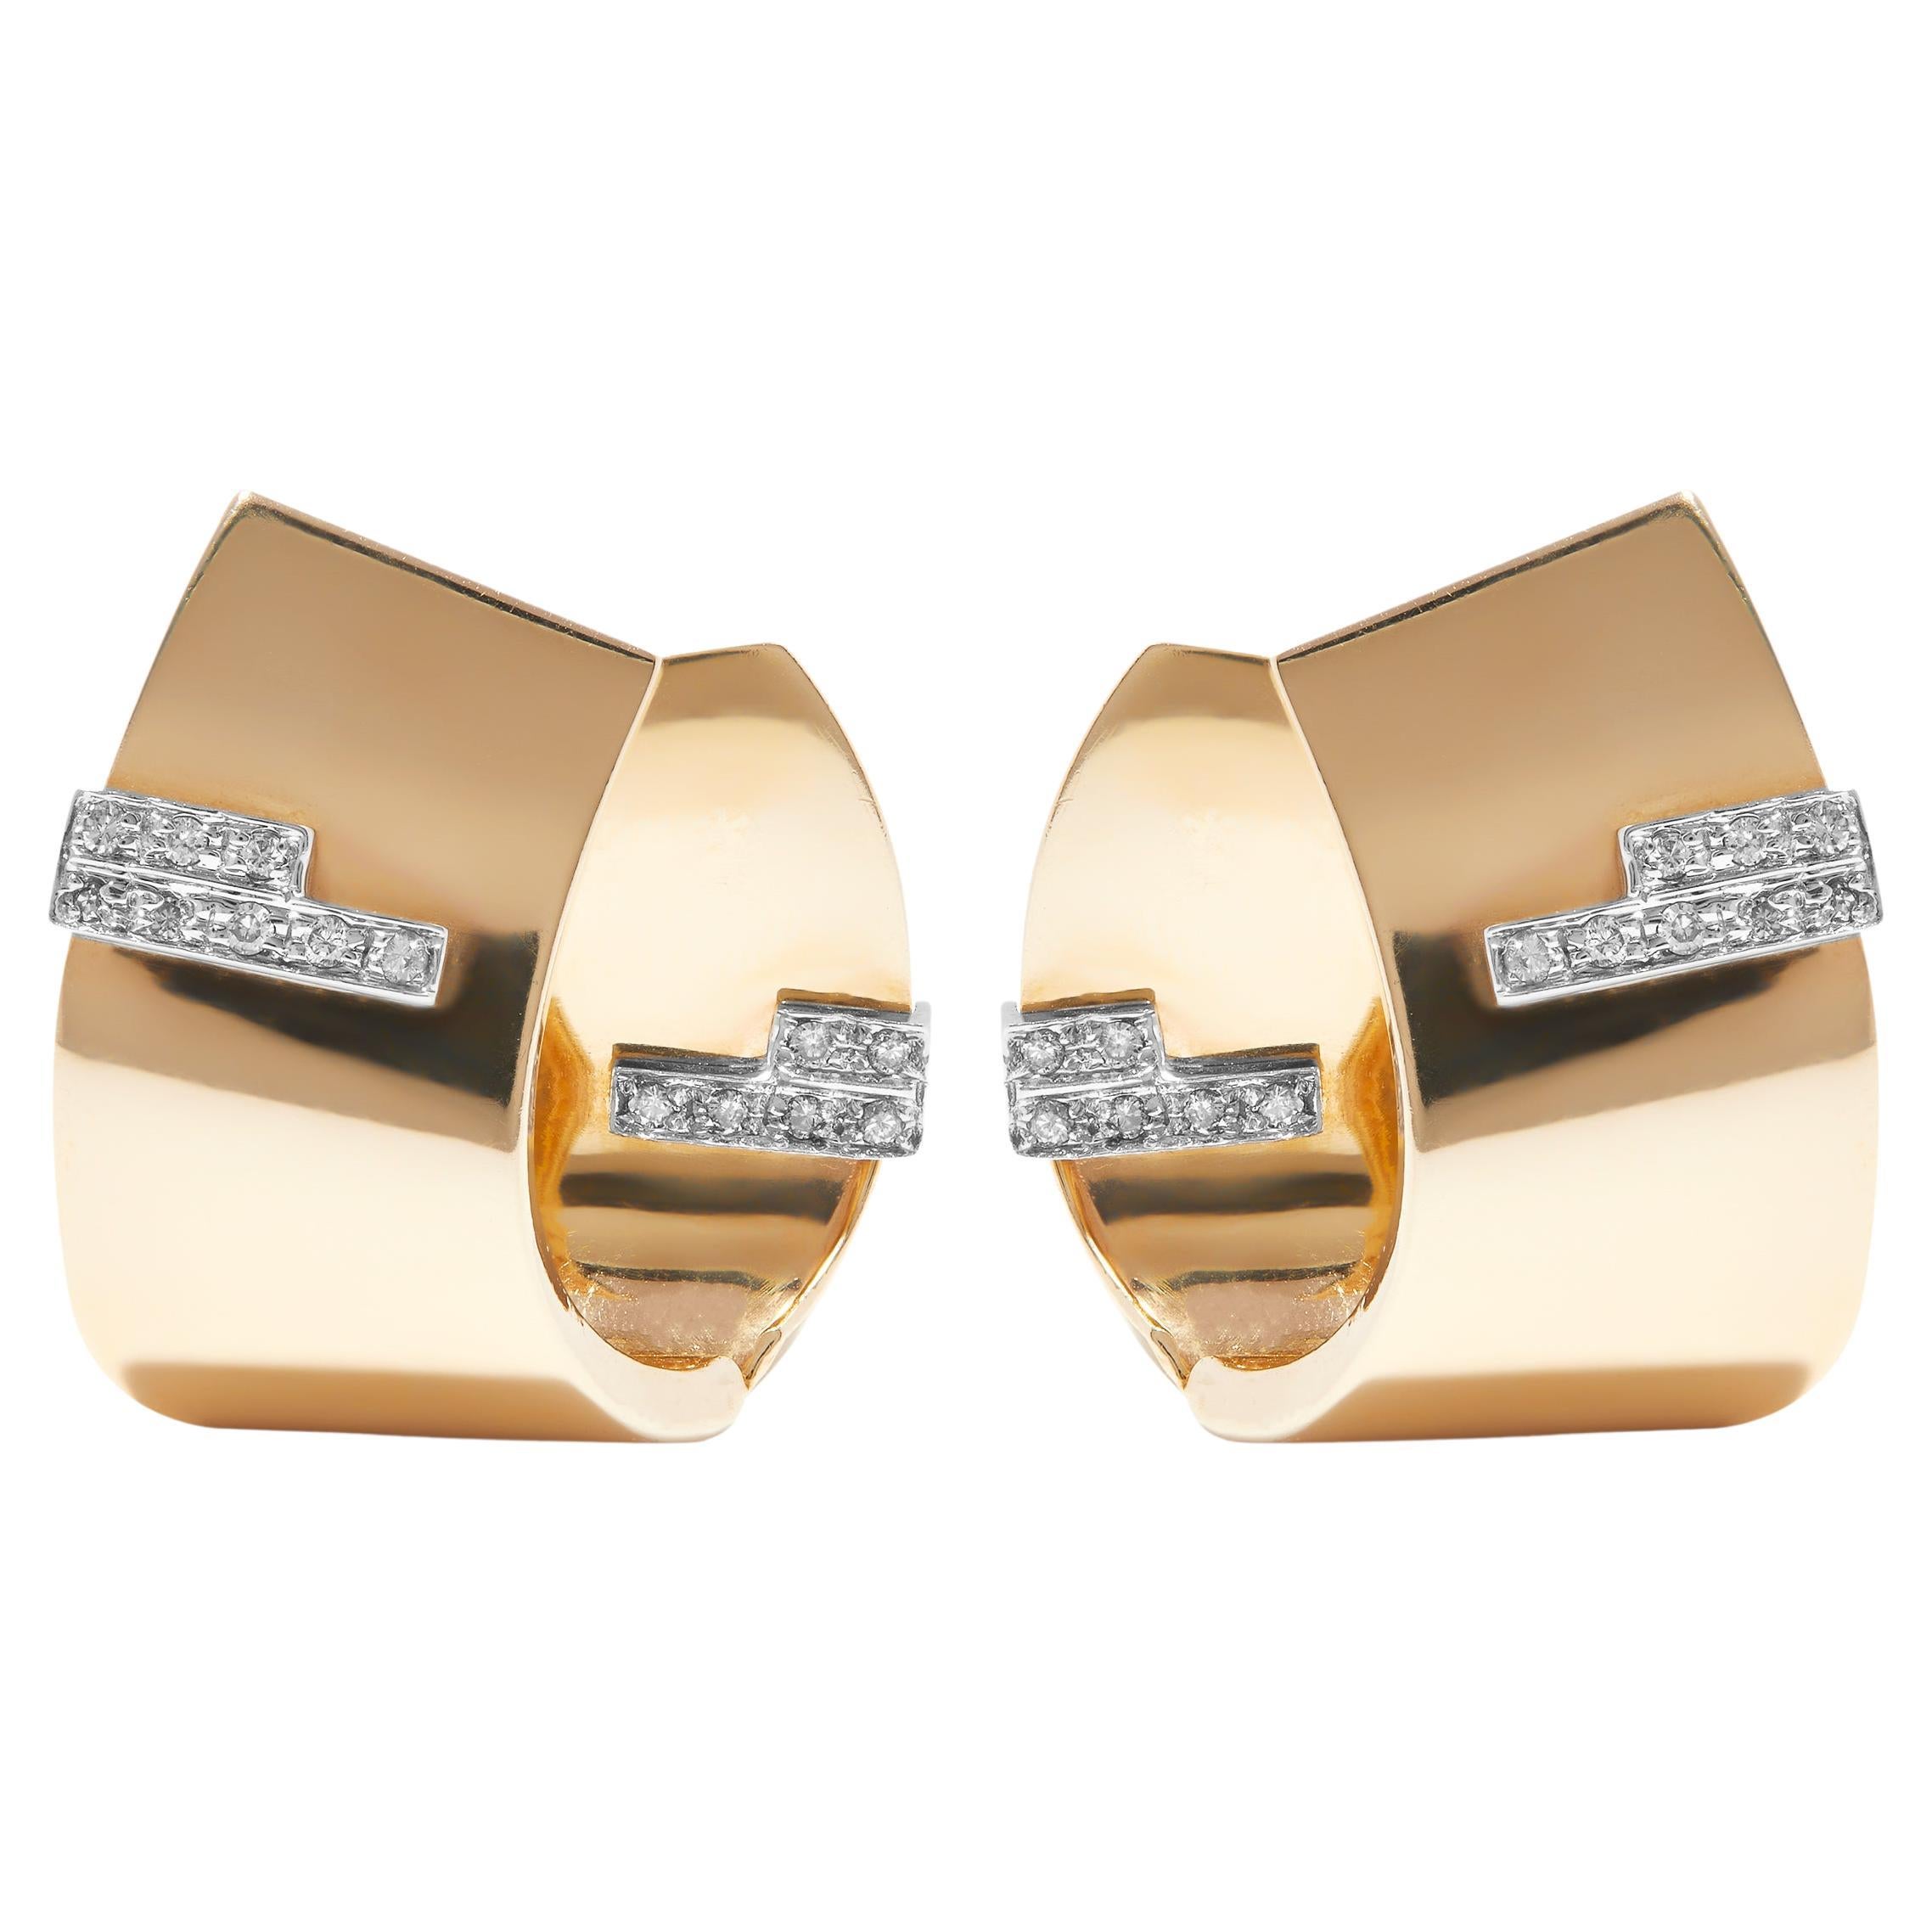 Play with the light reflections in these ultra-chic and bold pair of Italian retro earrings! Artfully sculpted in gleaming 14ct yellow gold, the flowing curls lead to an inclined finish, hugging and flattering the ears. They are further accented by